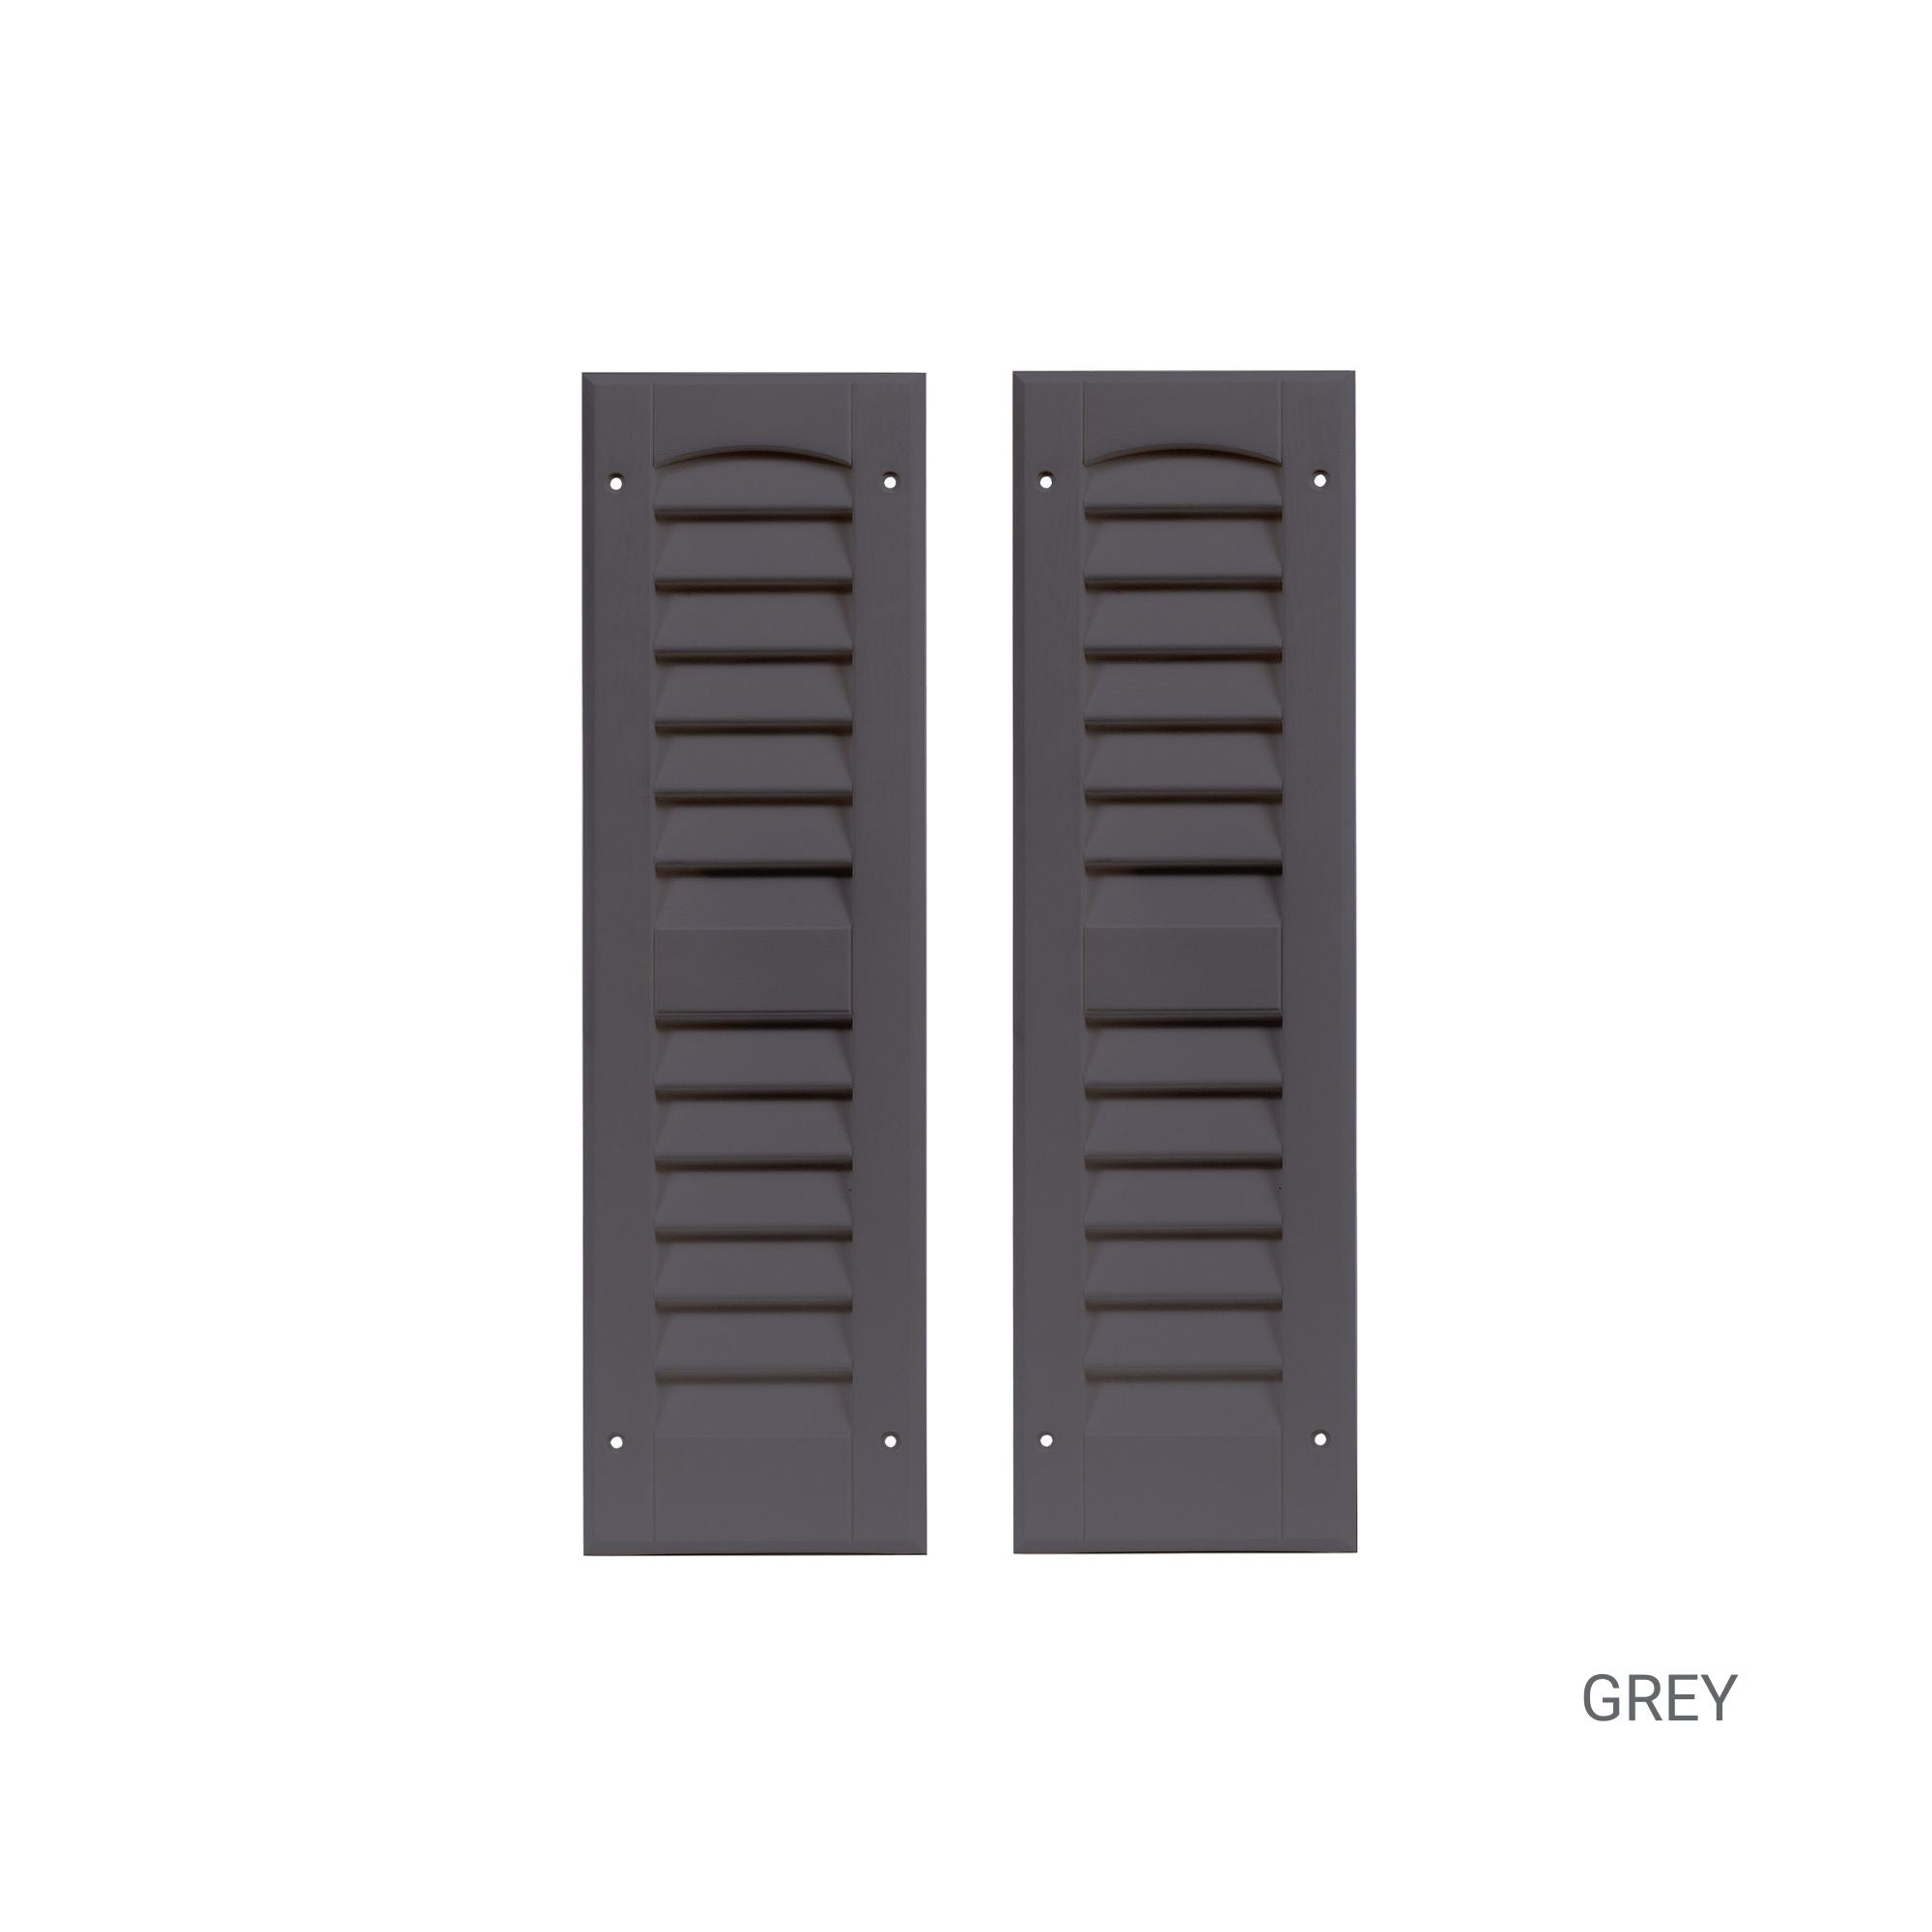 Pair of 6" W x 21" H Louvered Grey Shutters for Sheds, Playhouses, and MORE